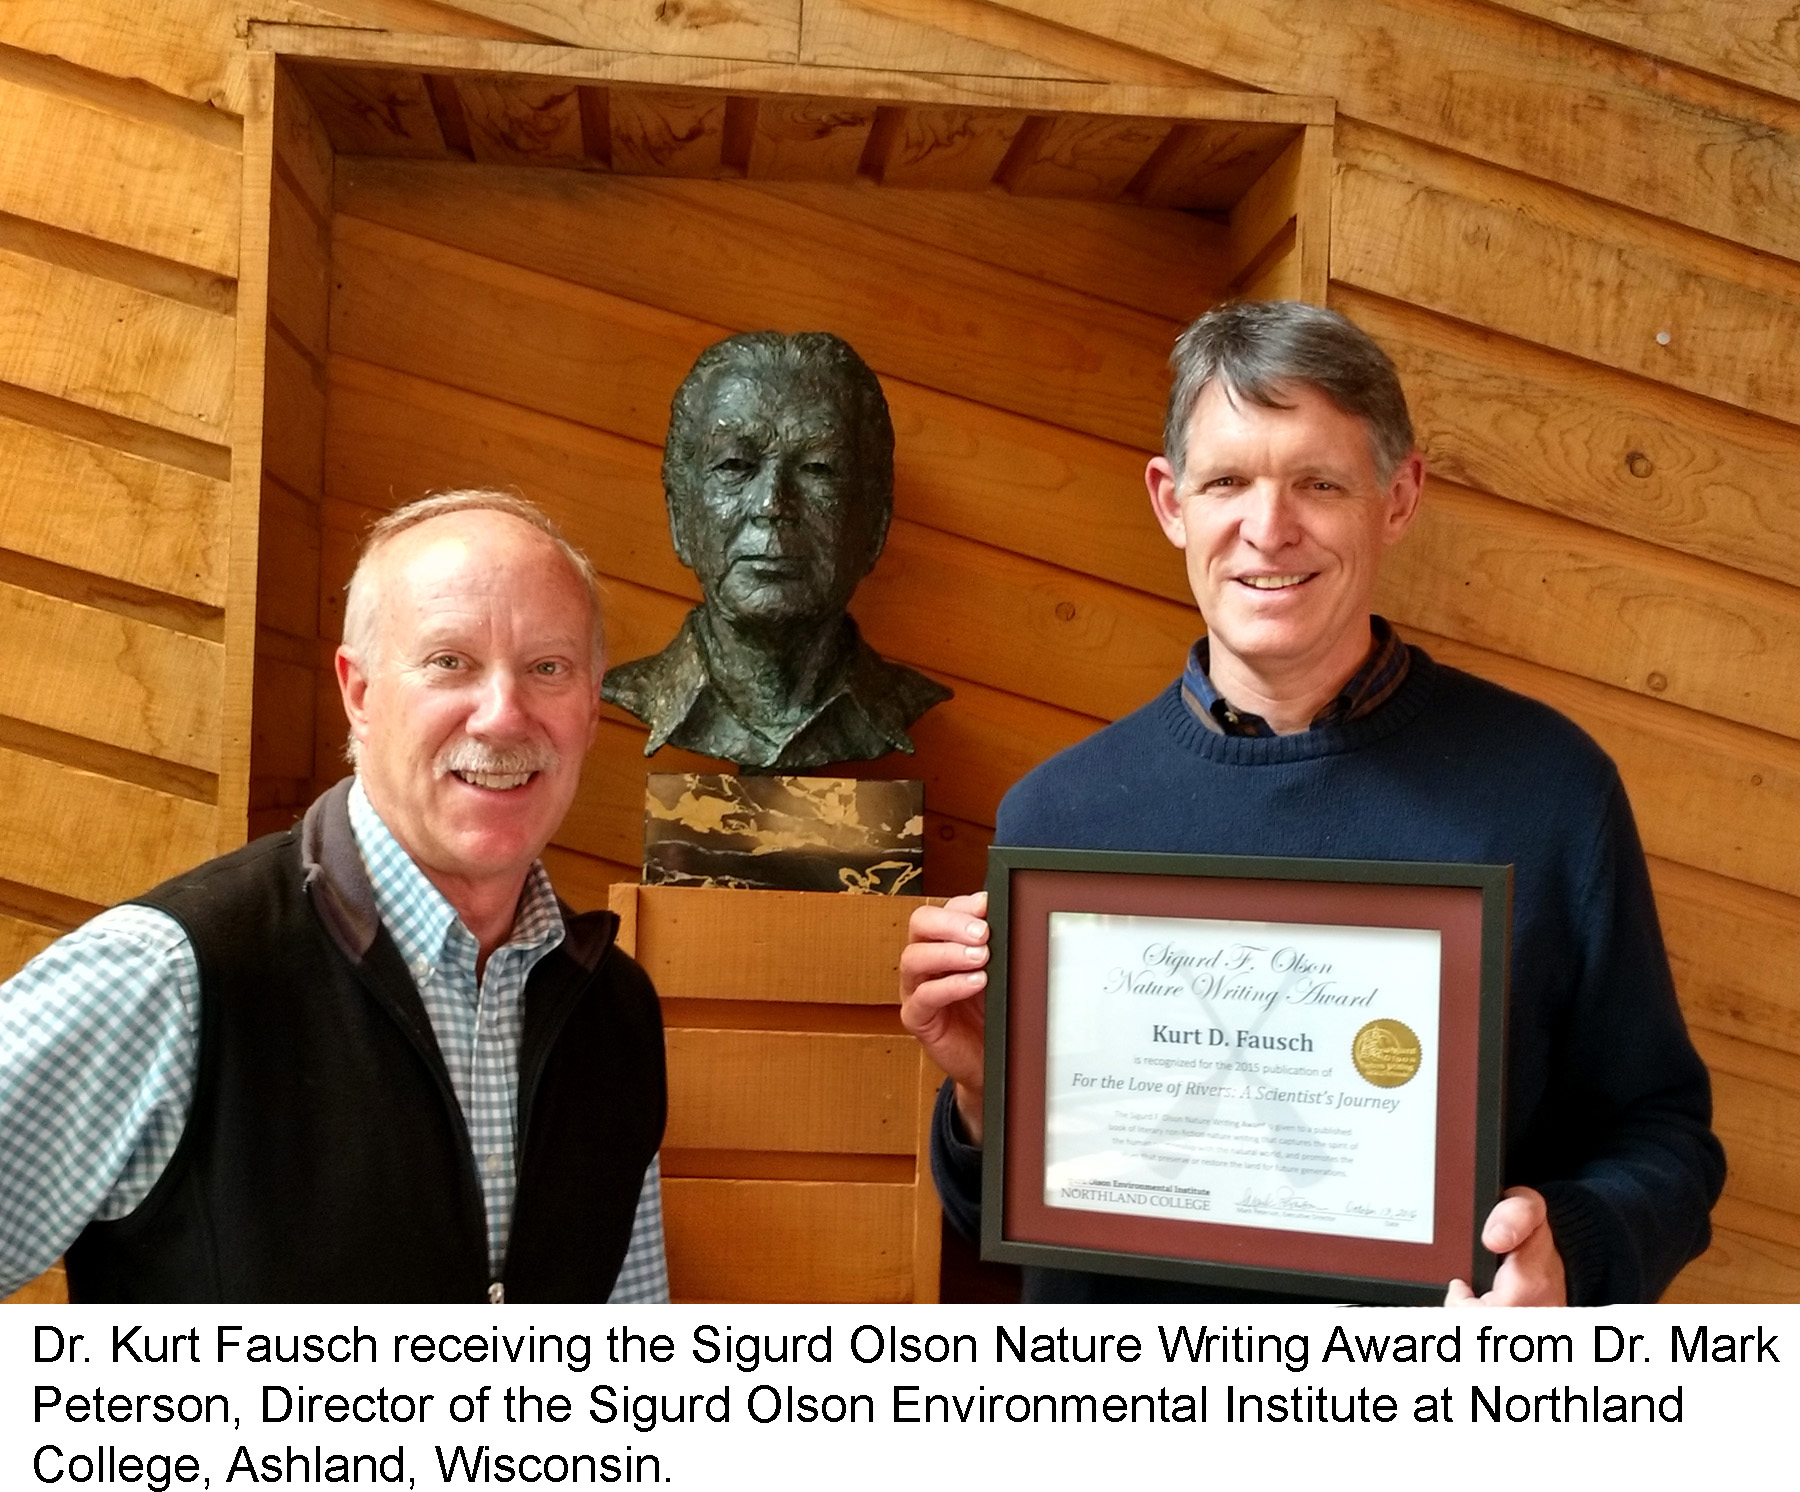 Dr. Kurt Fausch receiving the Sigurd Olson Nature Writing Award from Dr. Mark Peterson, Director of the Sigurd Olson Environmental Institute at Northland College, Ashland, Wisconsin